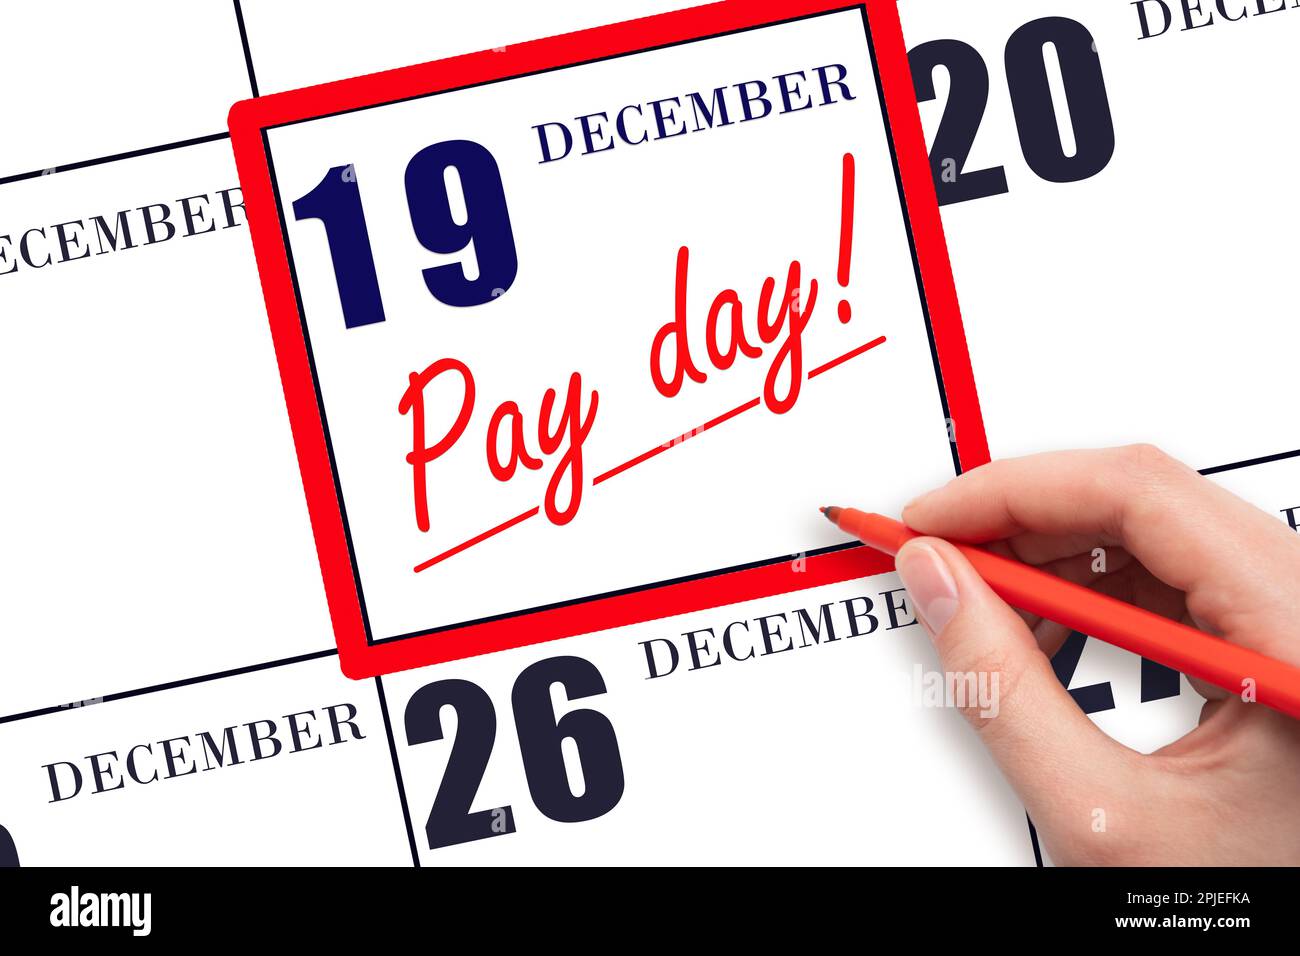 19th day of December. Hand writing text PAY DATE on calendar date December 19 and underline it. Payment due date. Reminder concept of payment. Winter Stock Photo